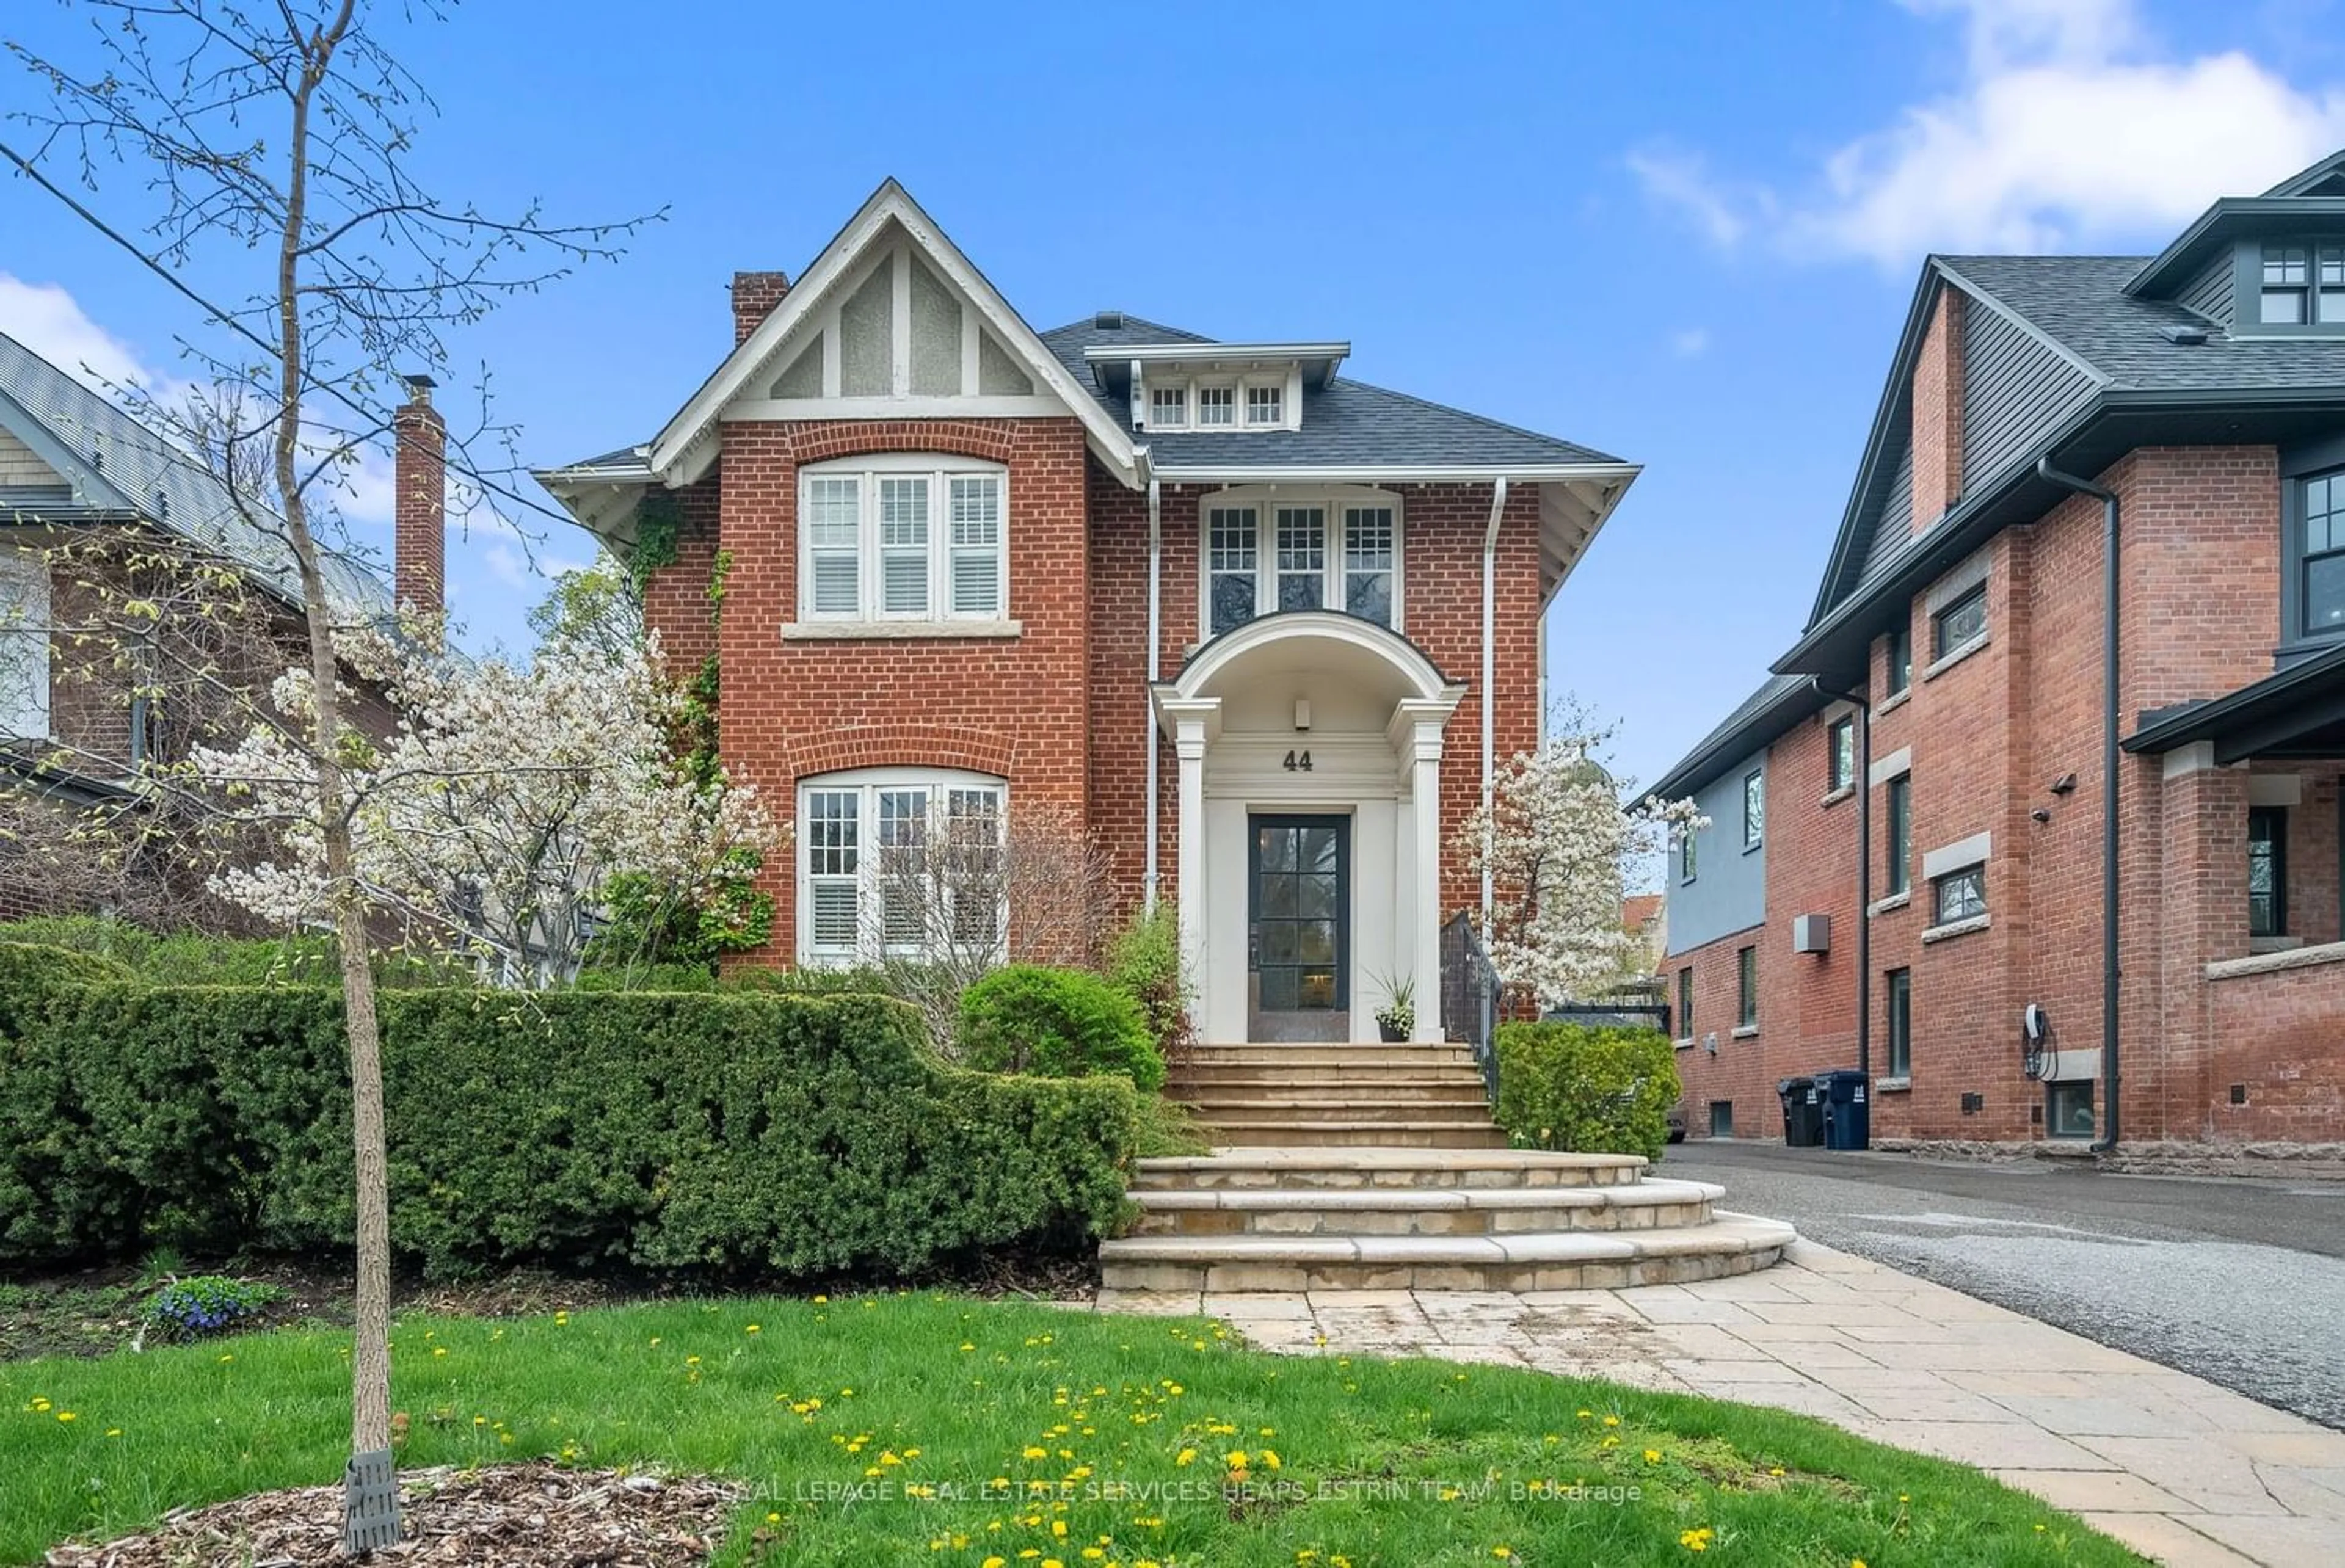 Home with brick exterior material for 44 Glenrose Ave, Toronto Ontario M4T 1K4